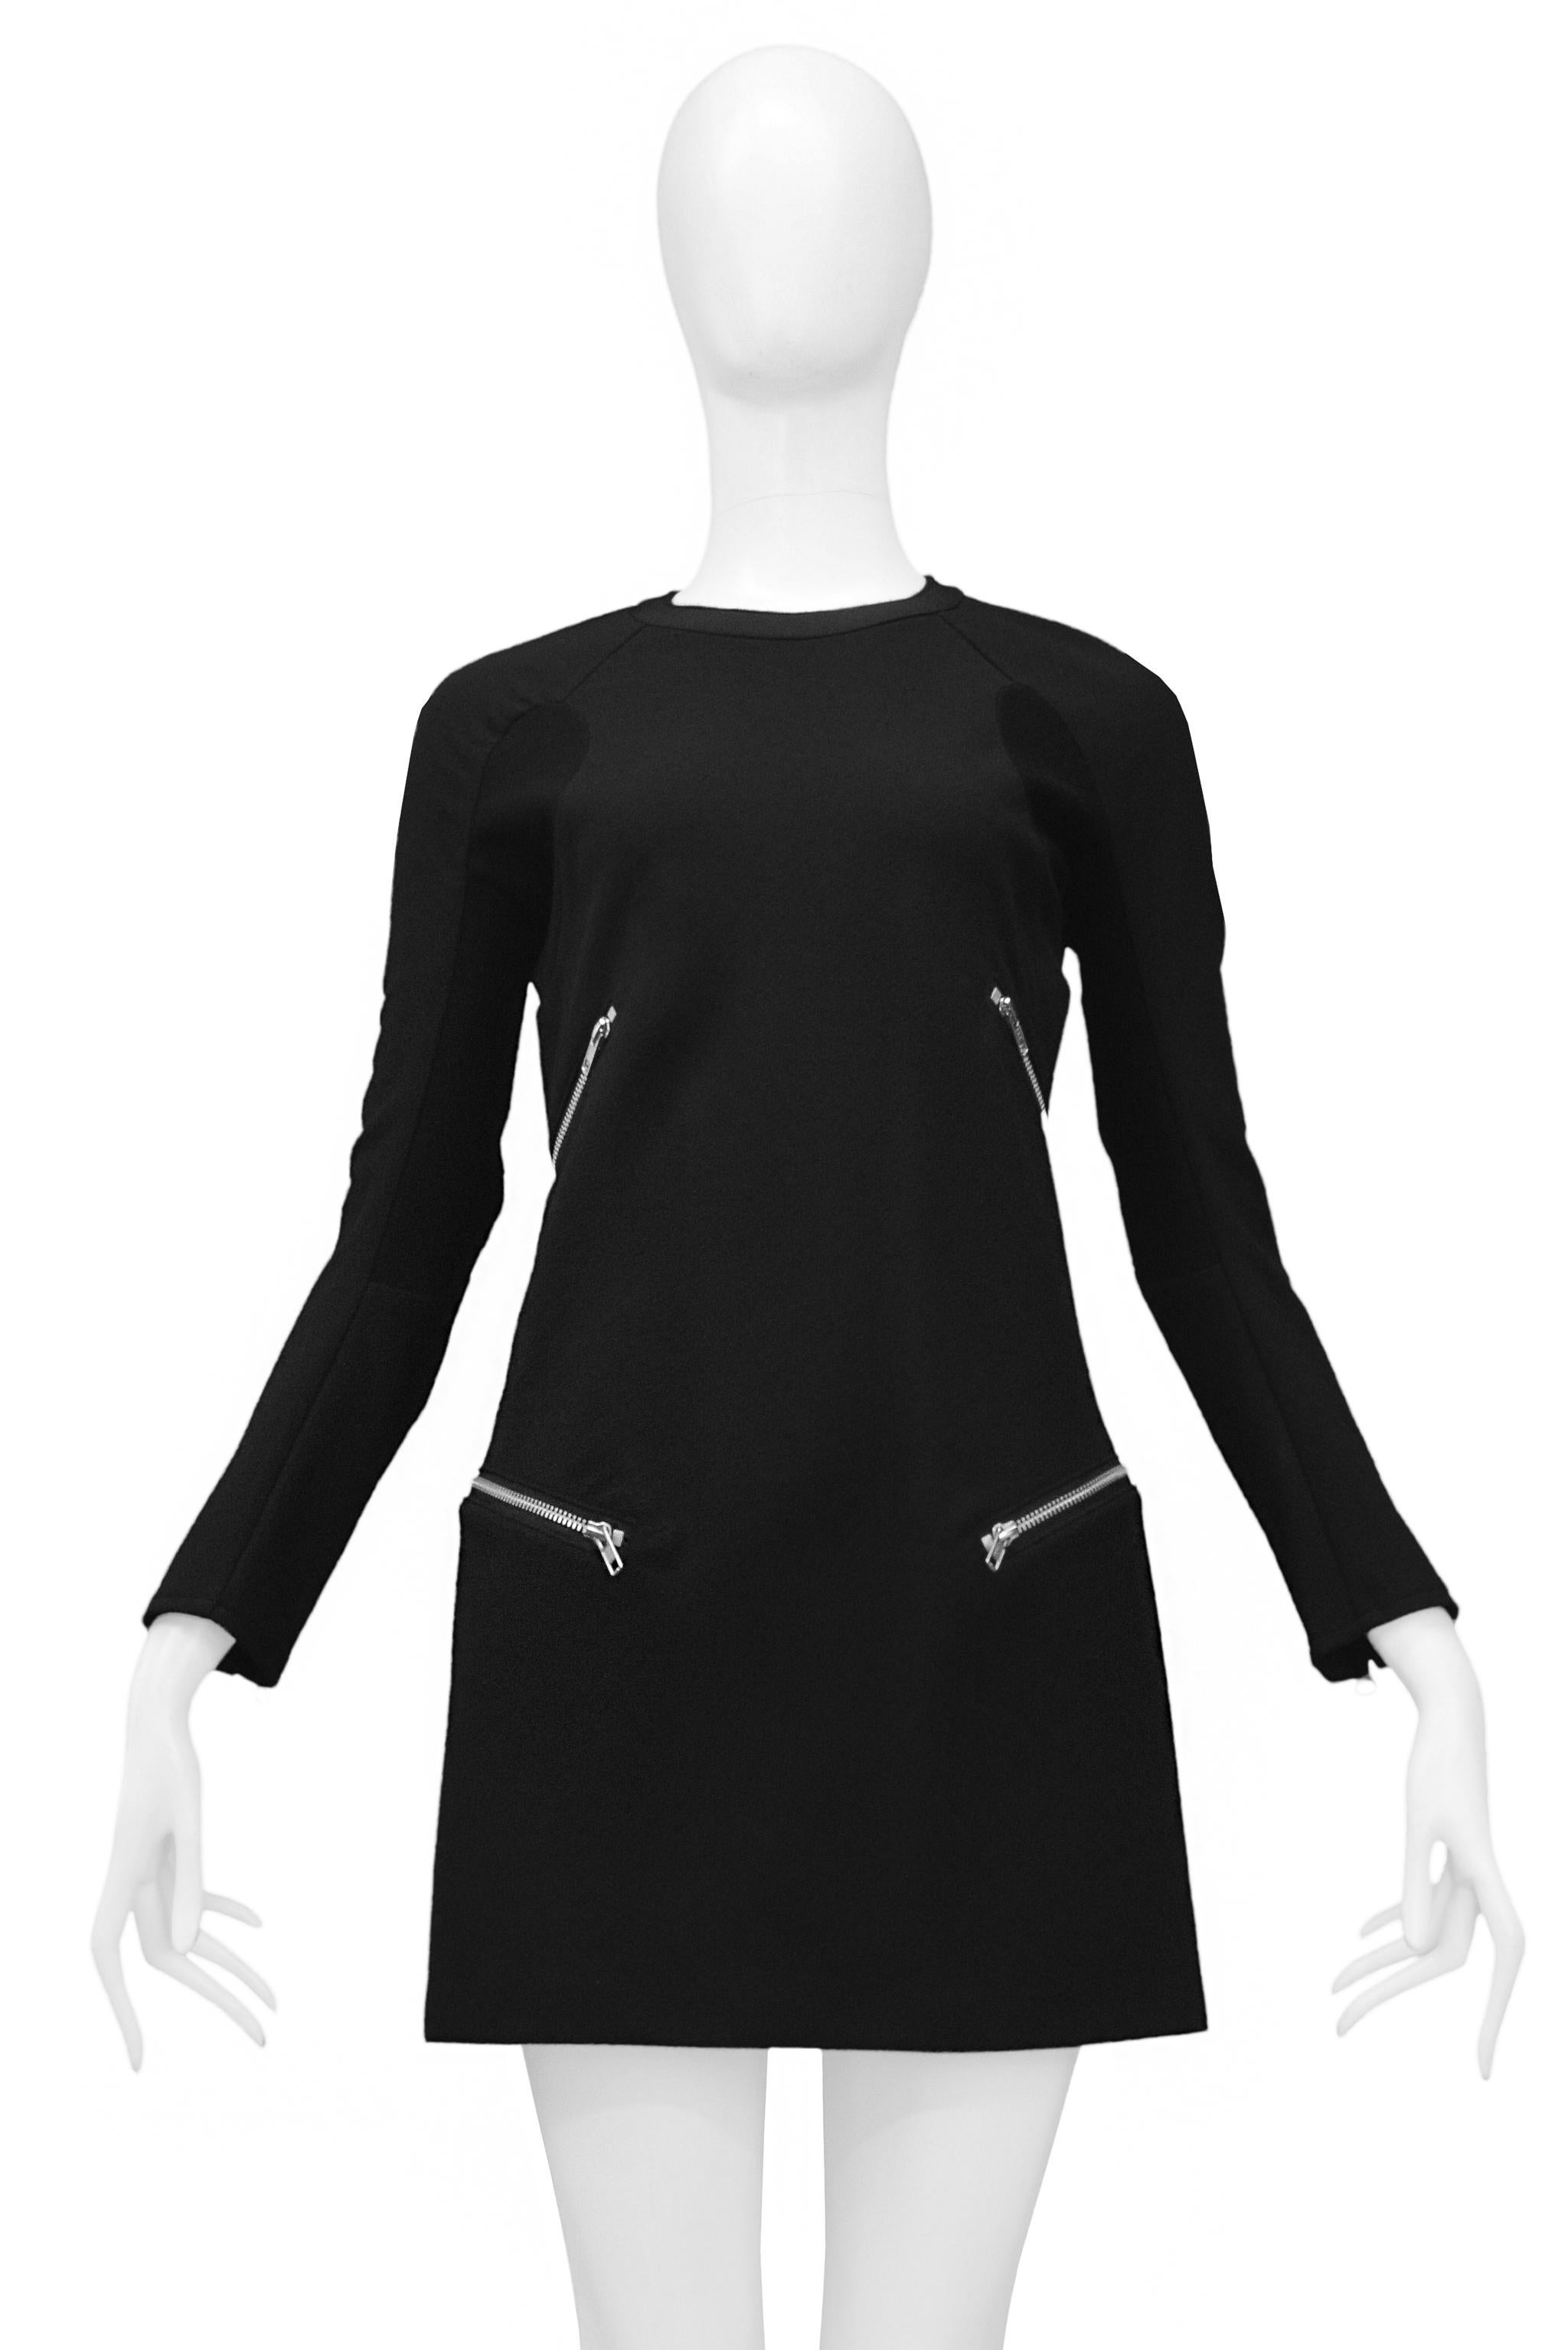 Junya Watanabe Black Wool Zipper Dress 2013 In Excellent Condition For Sale In Los Angeles, CA